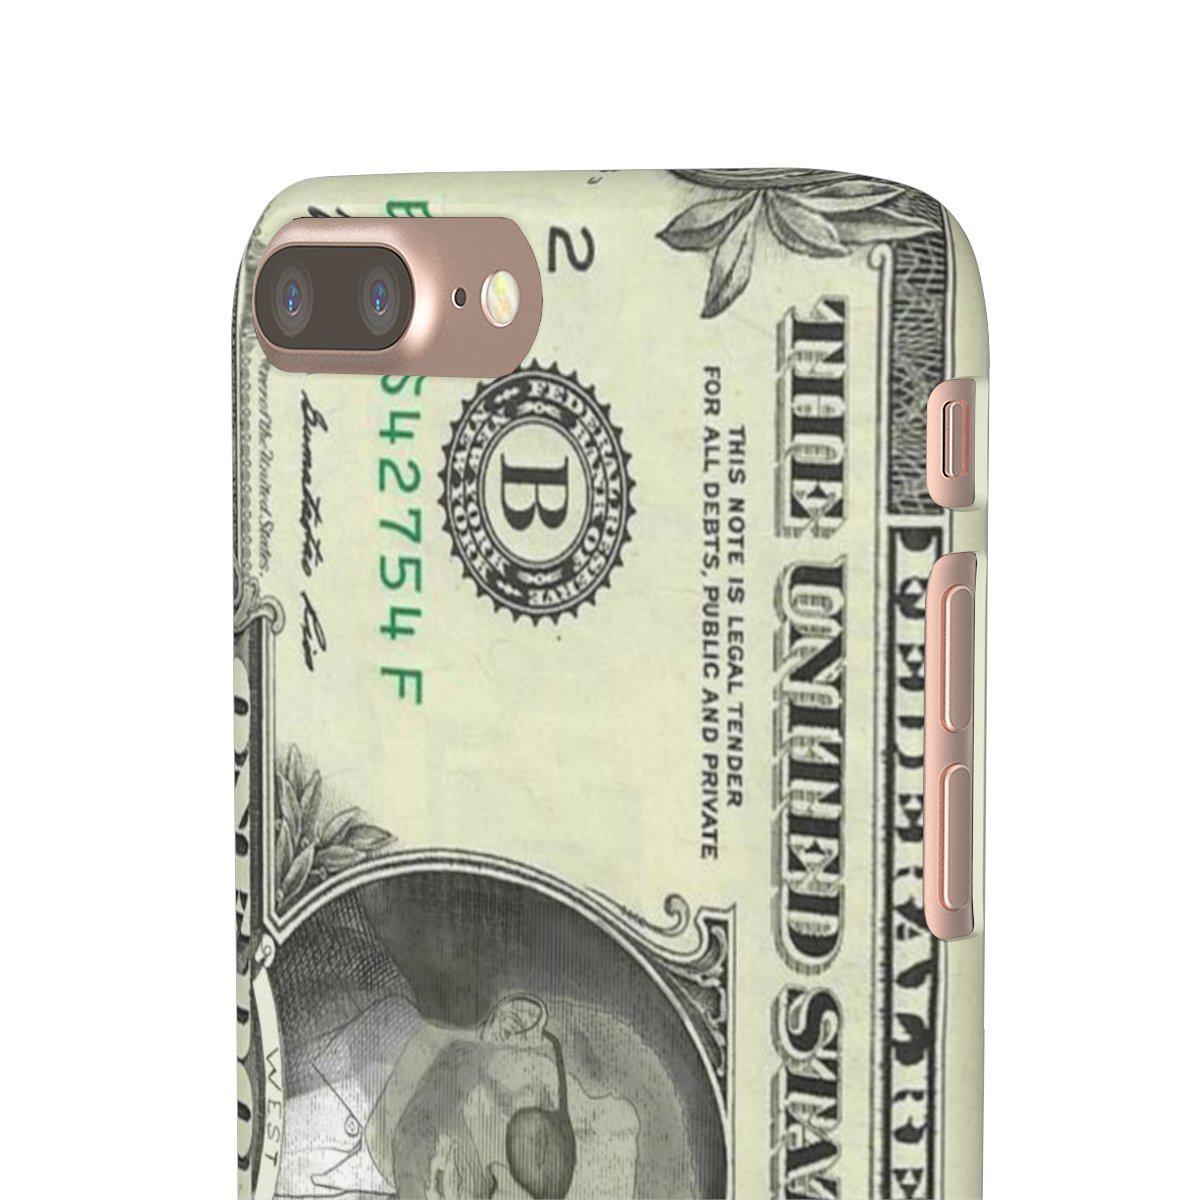 Kanye West President face on 1 dollar bill case iPhone Snap Case-iPhone 7 Plus-Glossy-Archethype